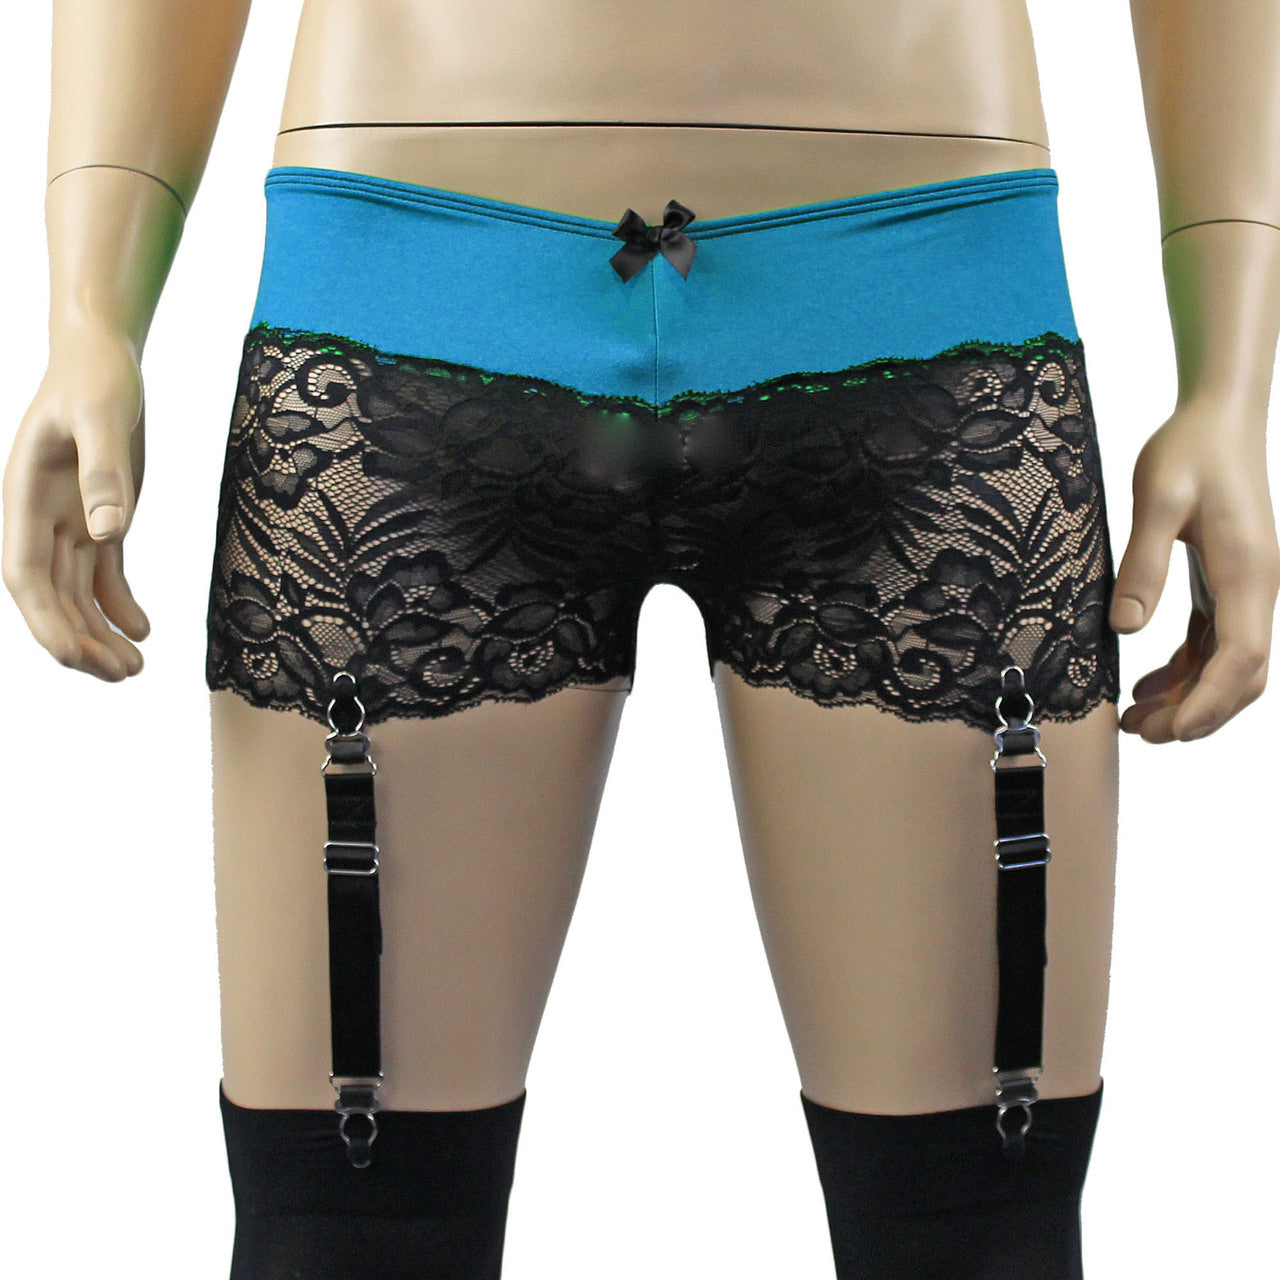 Mens Risque Boxer Briefs with Detachable Garters & Stockings Teal and Black Lace